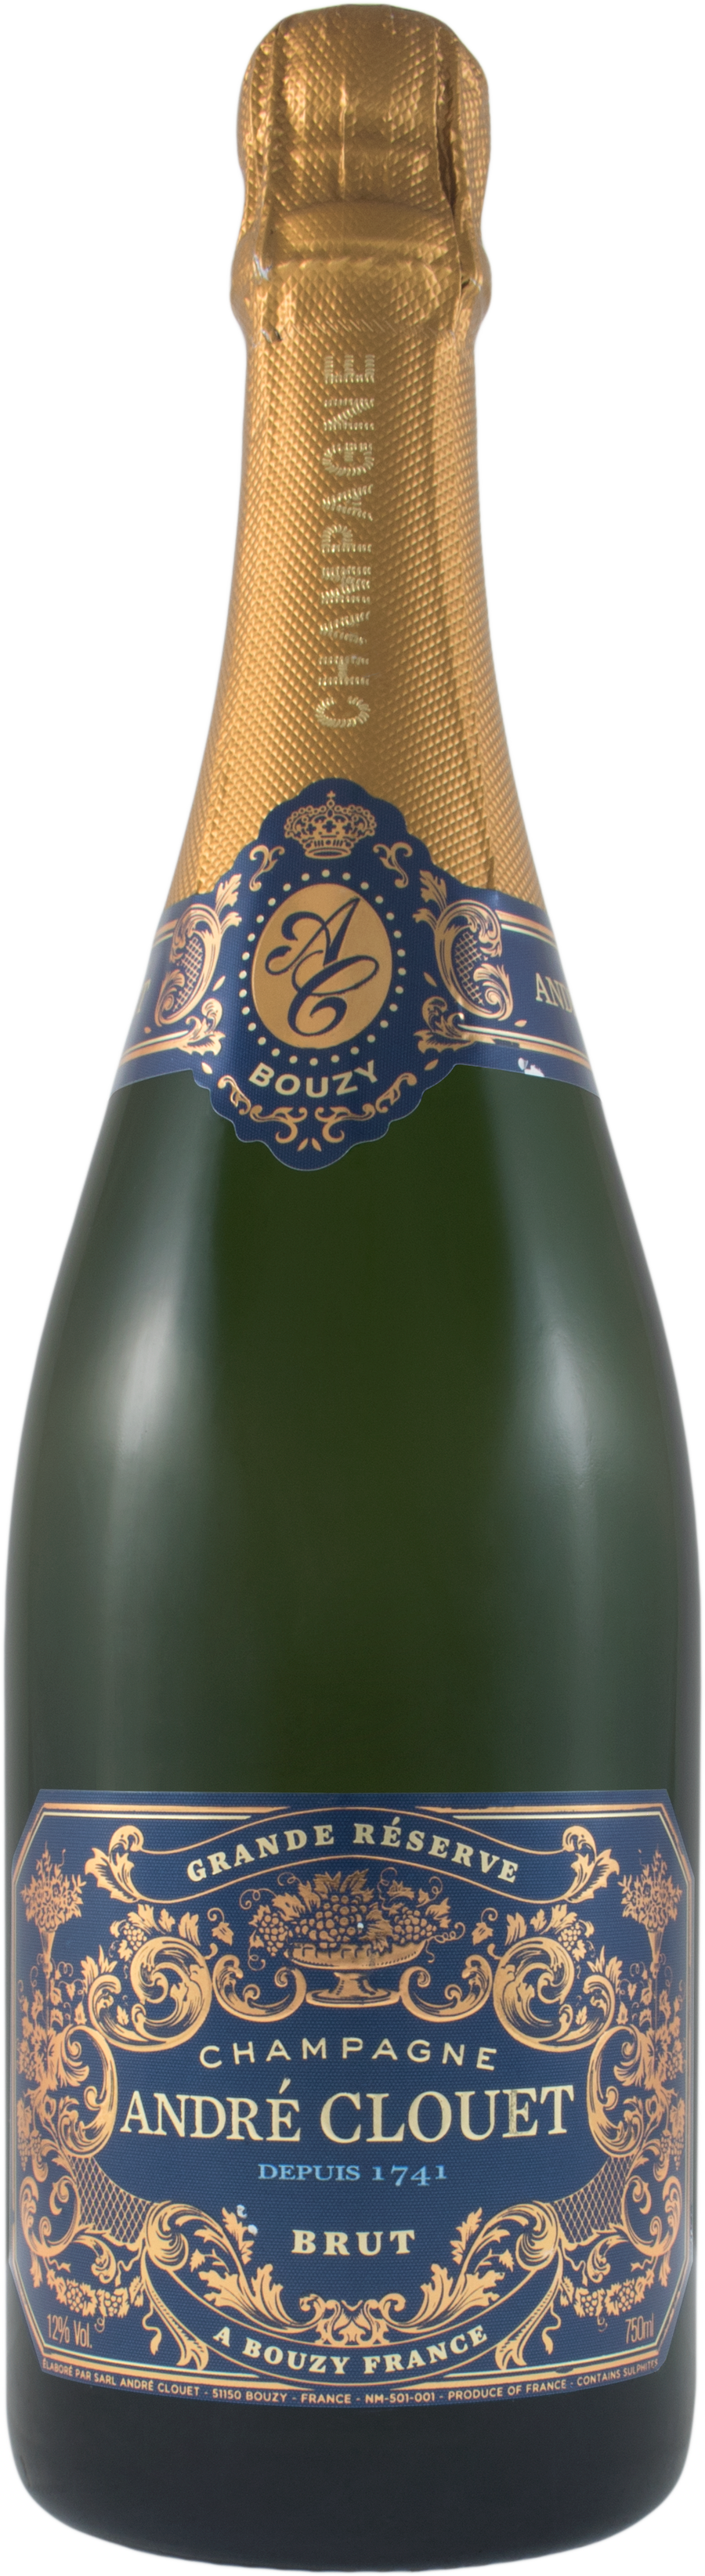 Andre Clouet Champagne Brut Grand Reserve